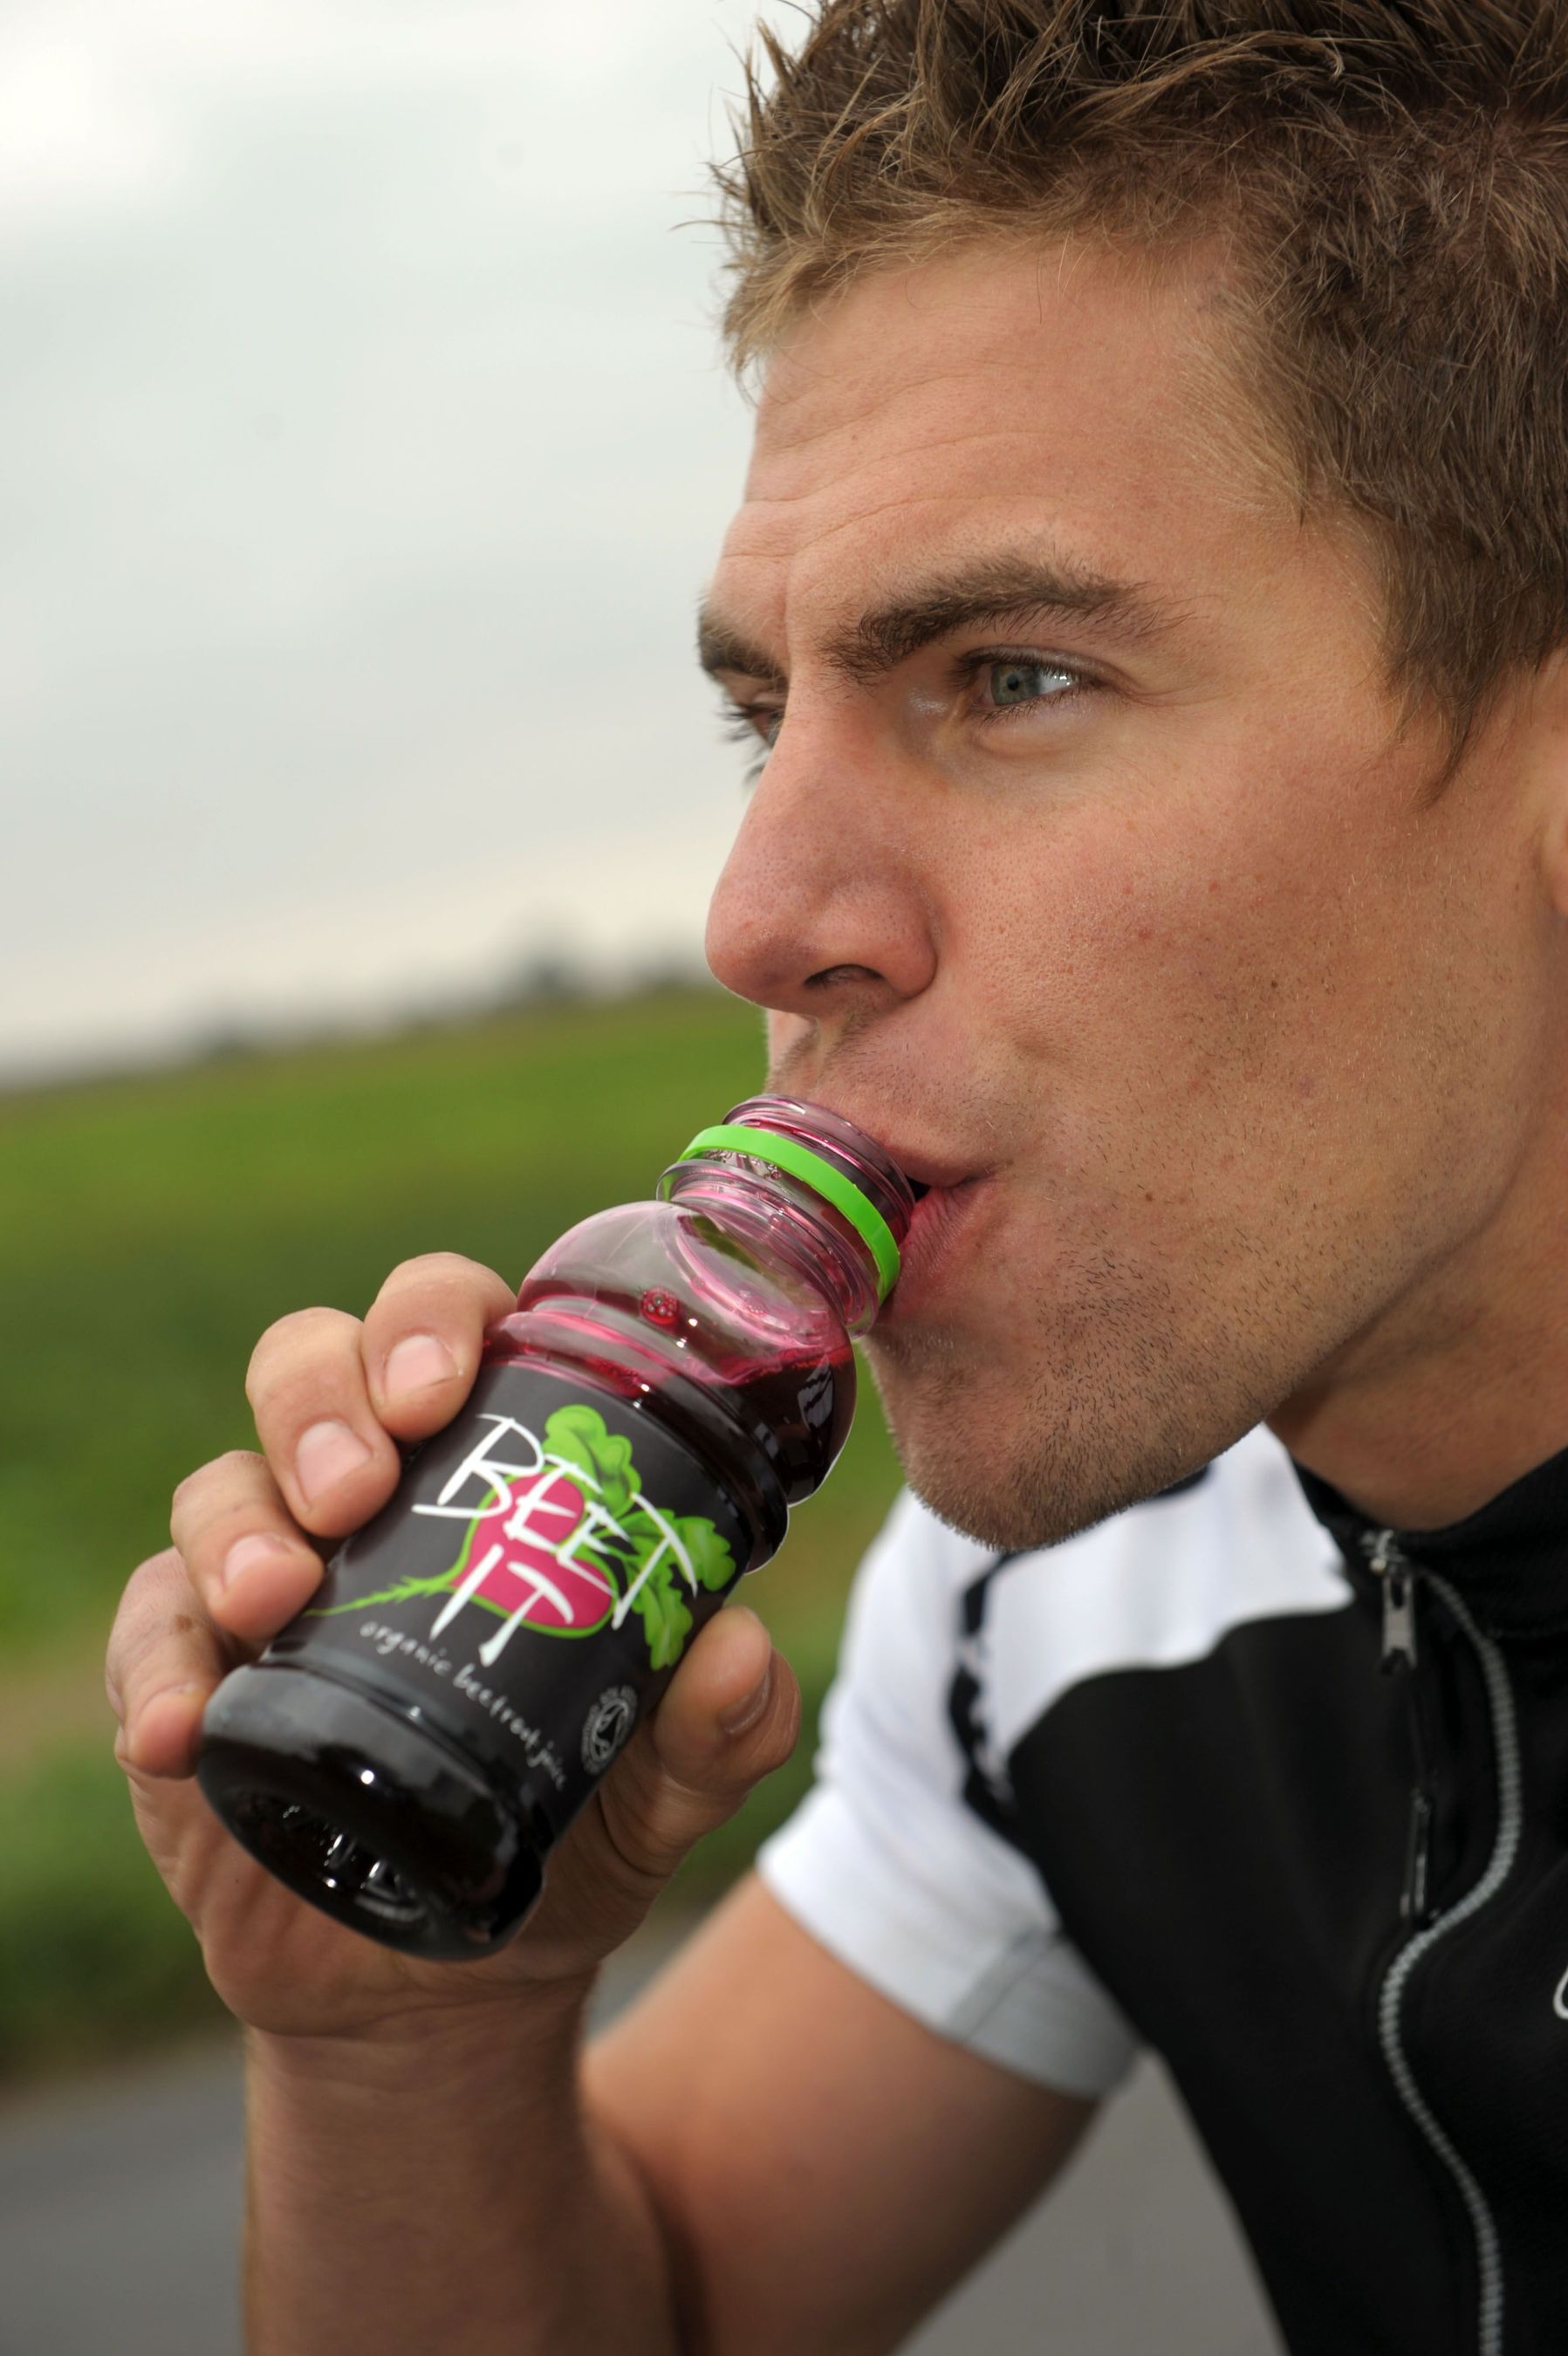 Drinking 250ml a day of Beetroot Juice is scientifically proven to reduce blood pressure (PRNewsFoto/James White Drinks)